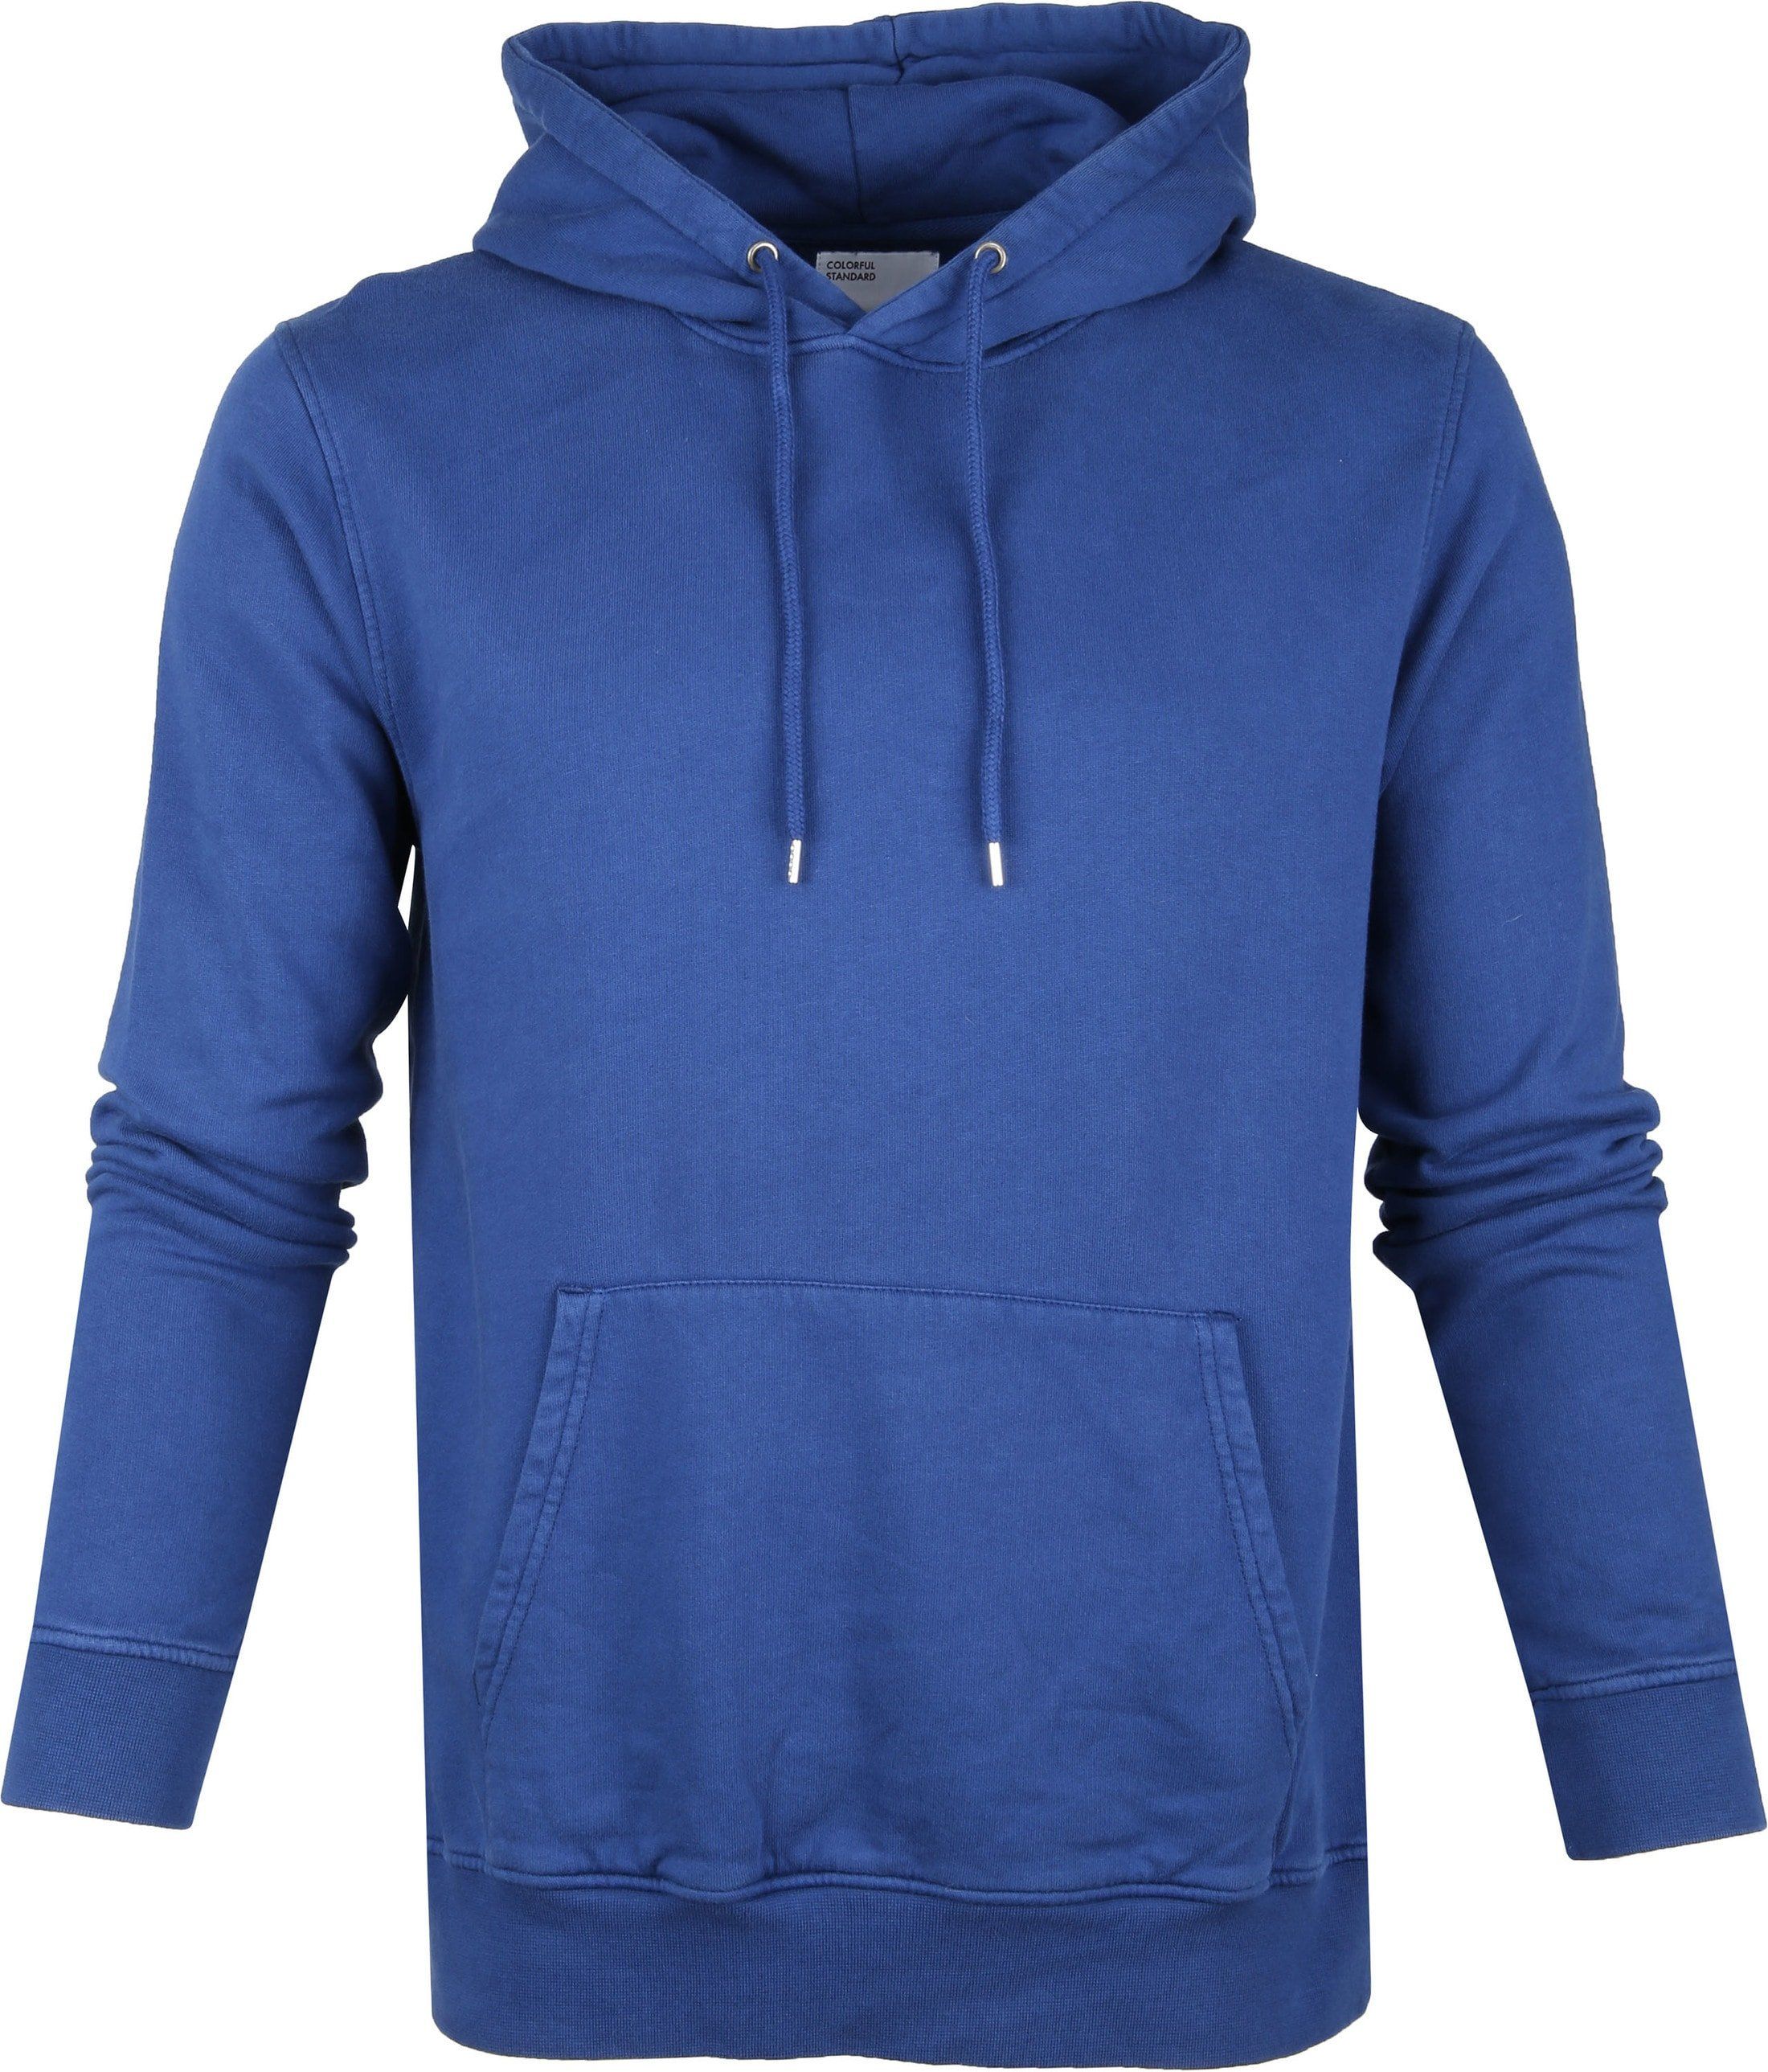 Colorful Standard Organic Hoodie Blue size XL